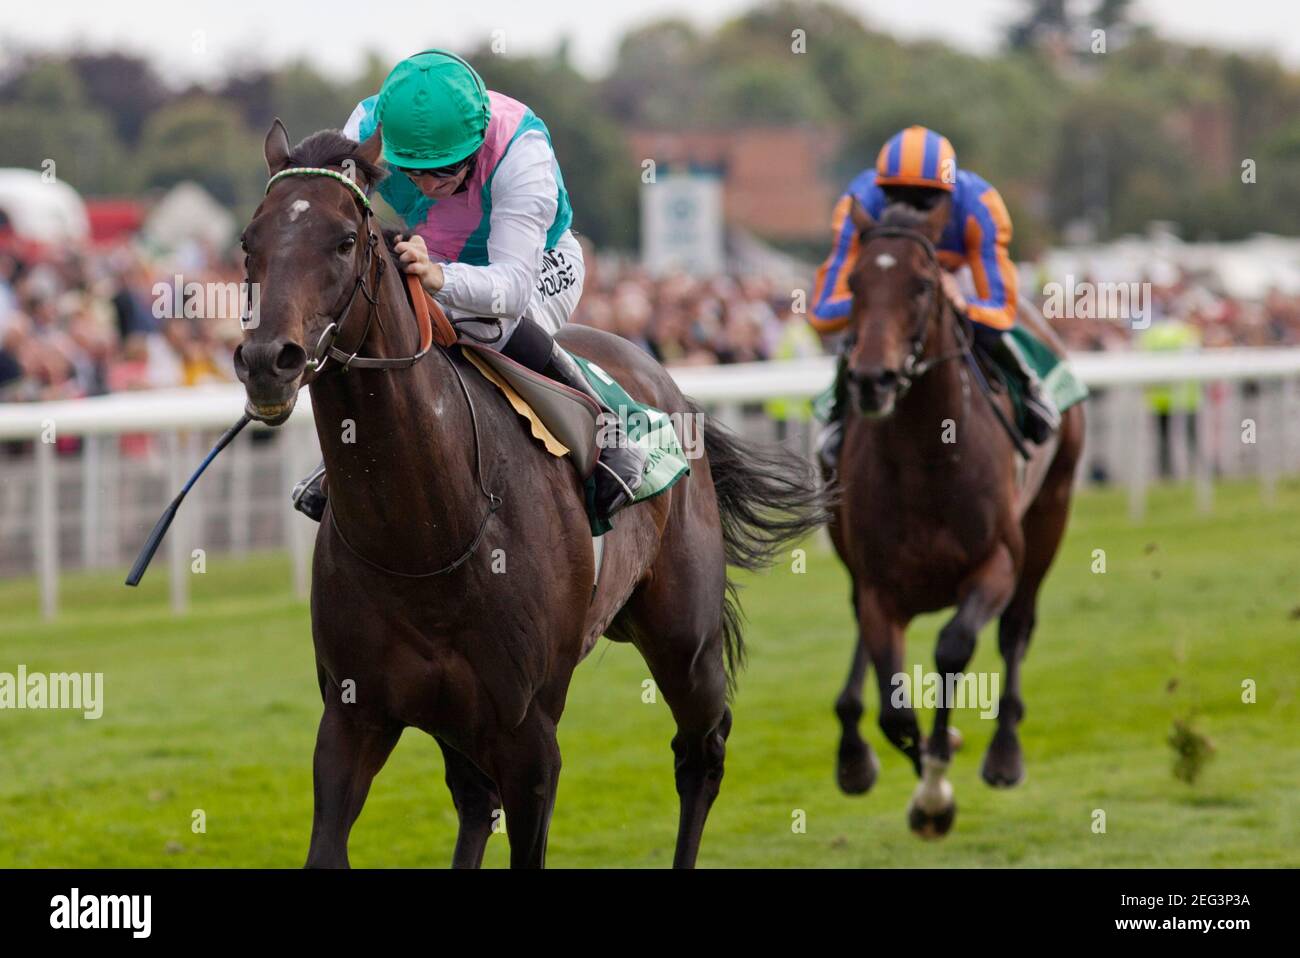 Horse Racing - York Ebor Meeting  - York Racecourse - 17/8/11  Twice Over ridden by Ian Mongan (L) wins the 15.40, The Juddmonte International Stakes  Mandatory Credit: Action Images / Julian Herbert  Livepic Stock Photo